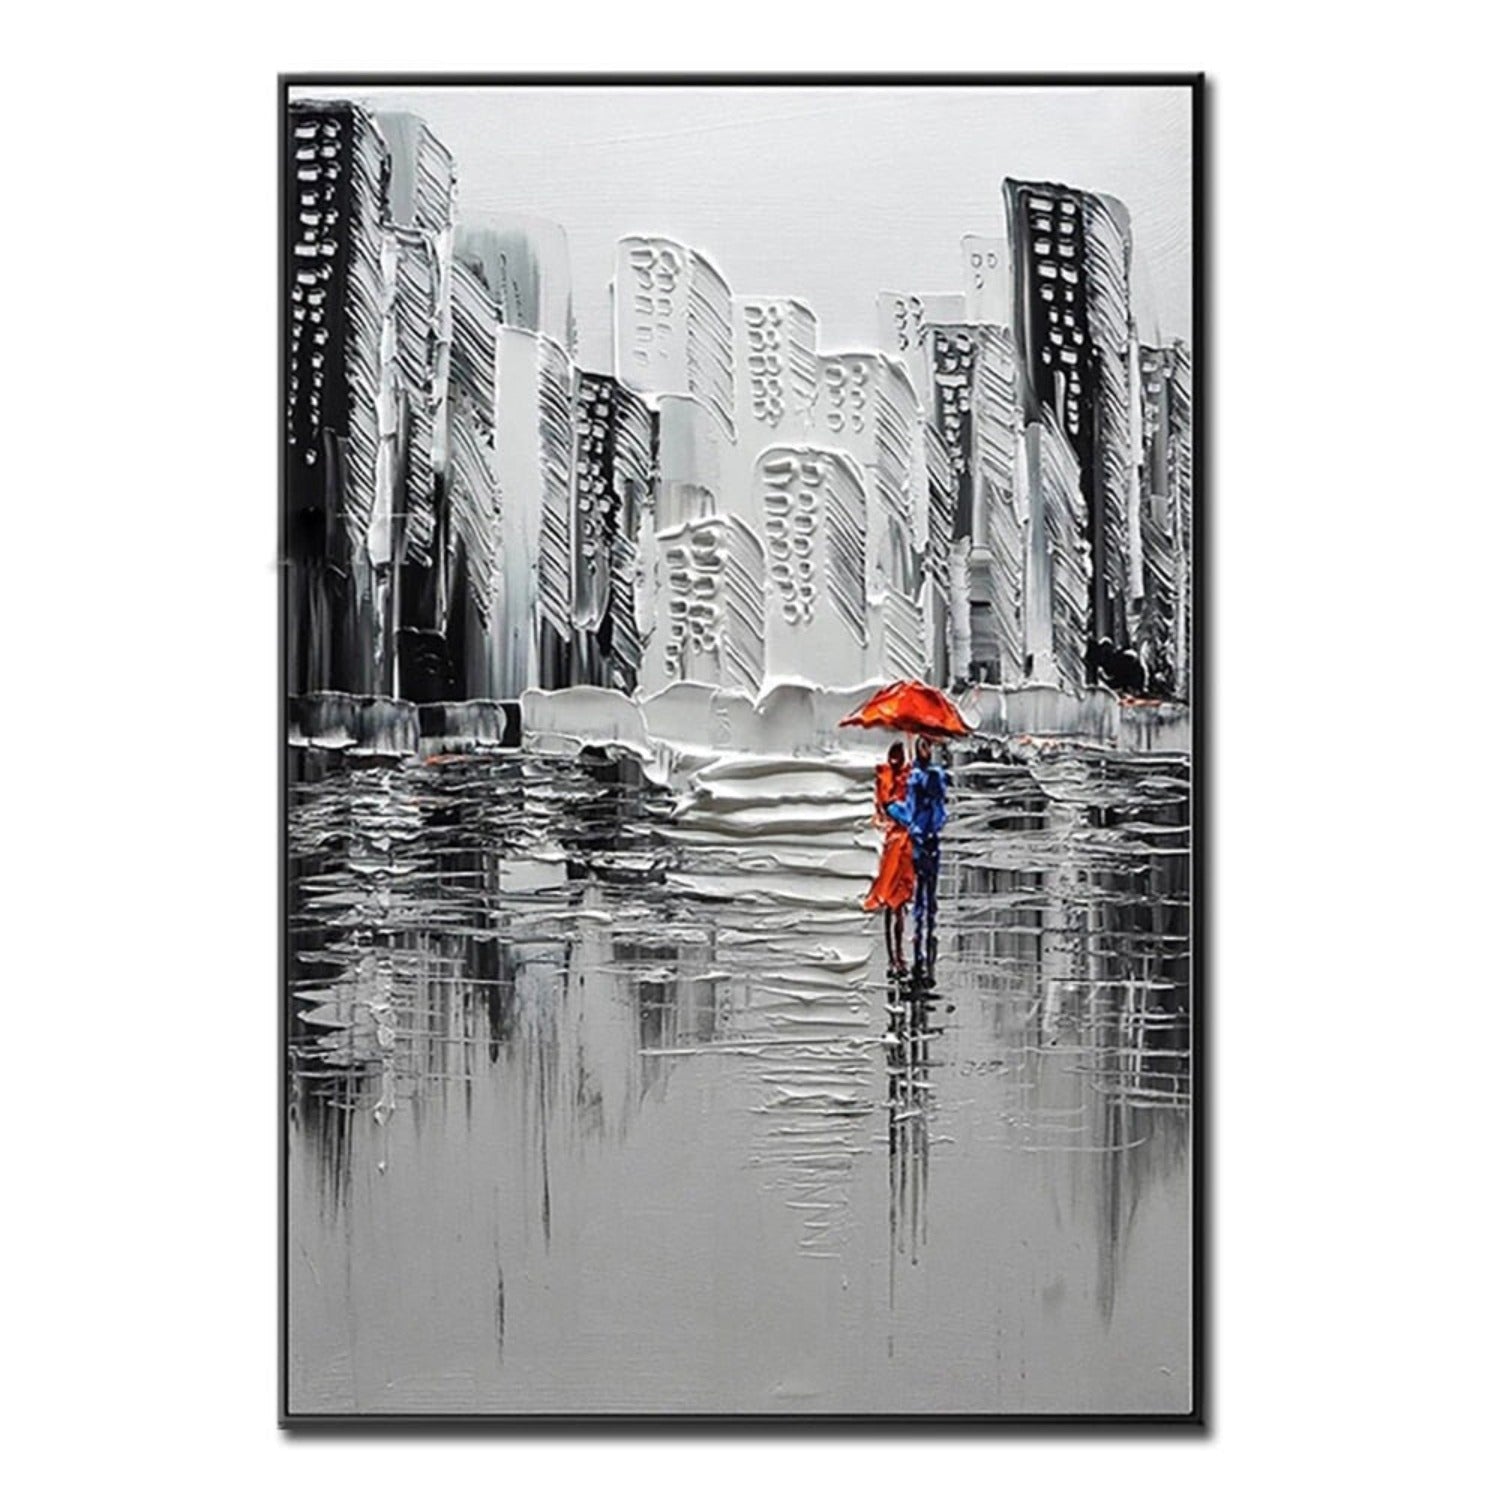 Walking Couple in Rain 100% Hand Painted Cityscape